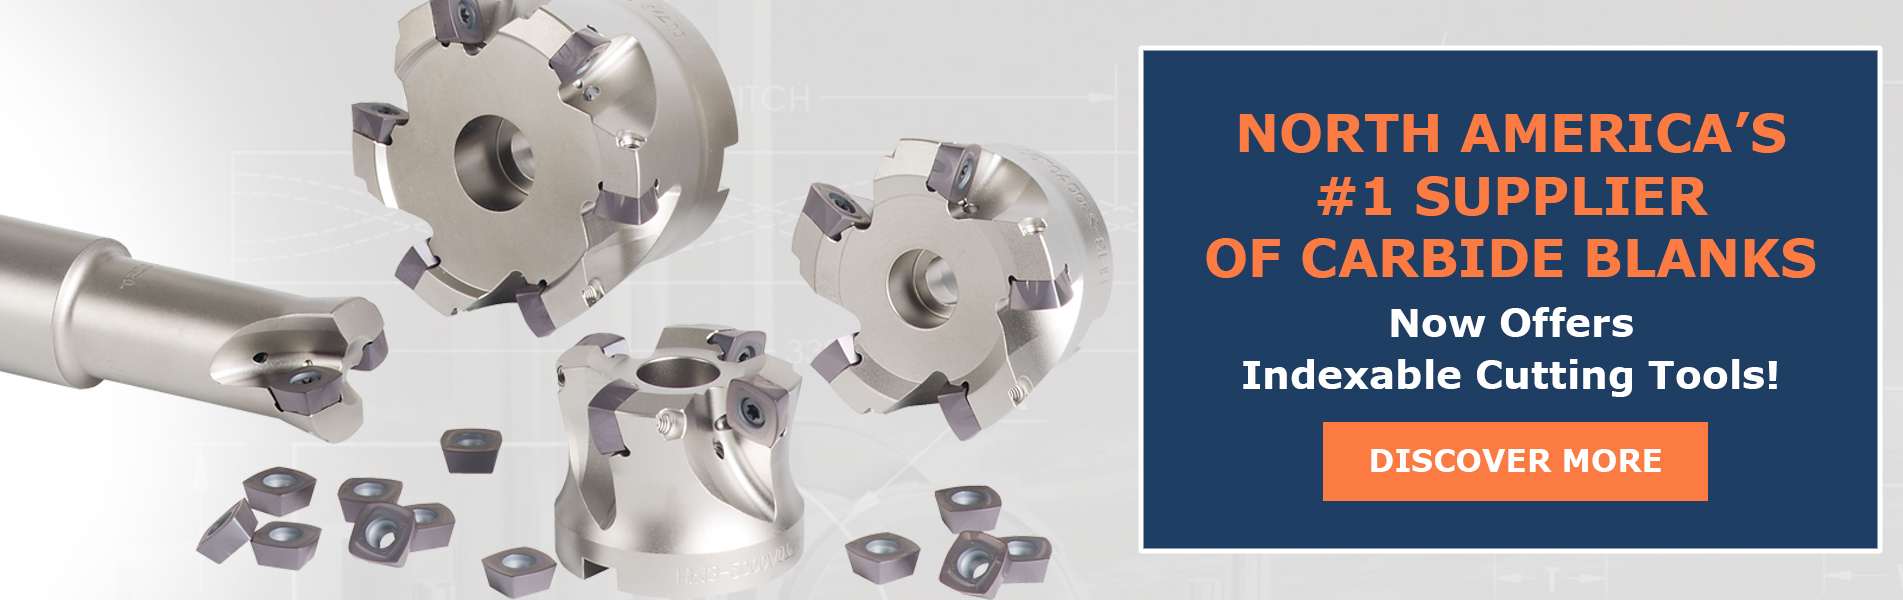 TechMet provides premium indexable cutting tools for metalcutting shops throughout North America.